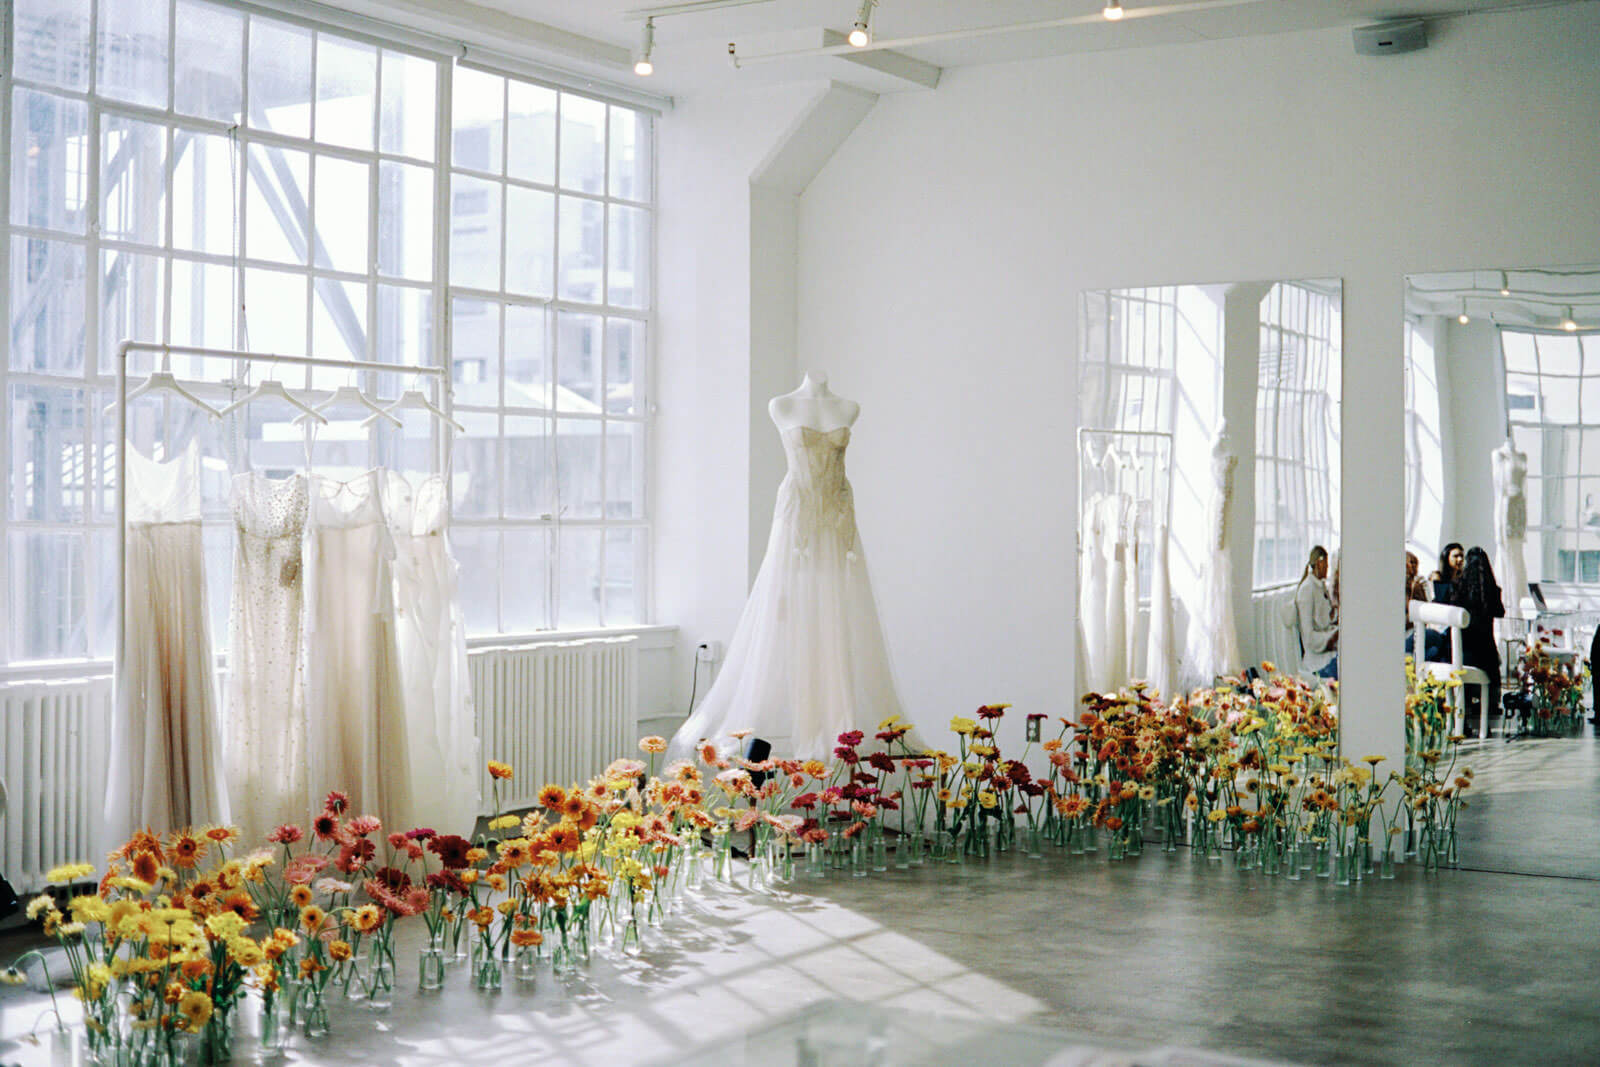 Bridal gowns on display in a room filled with flowers in the New York Bridal Fashion week. Image by Jenny Fu